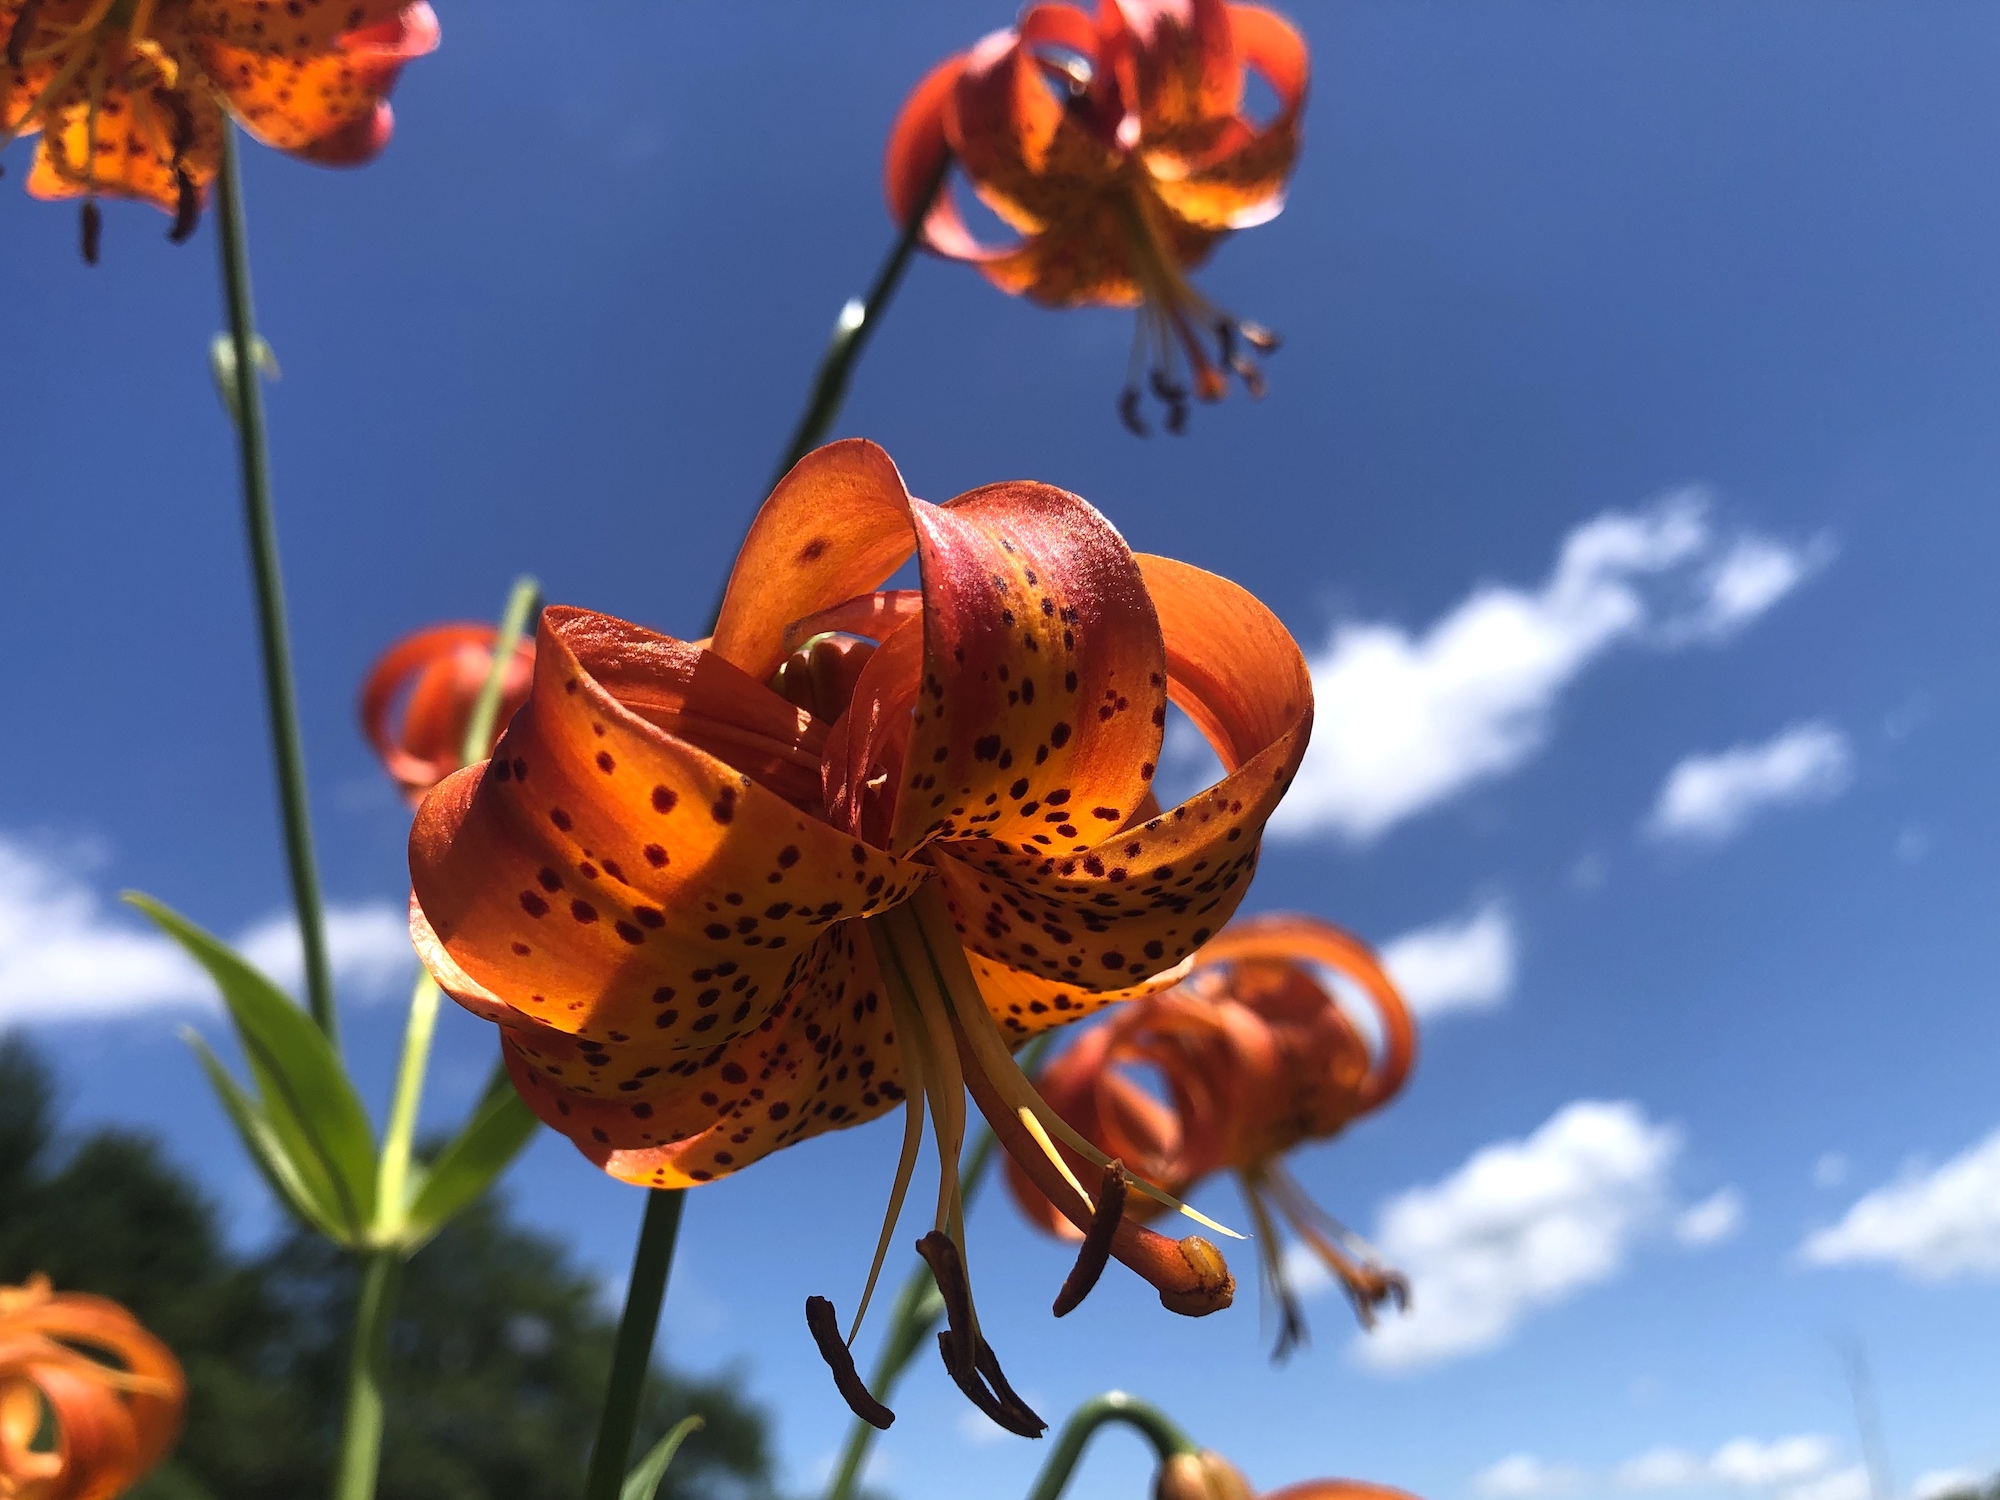 Michigan Lily in University of Wisconsin Arboretum's Curtis Prairie on July 10, 2020.